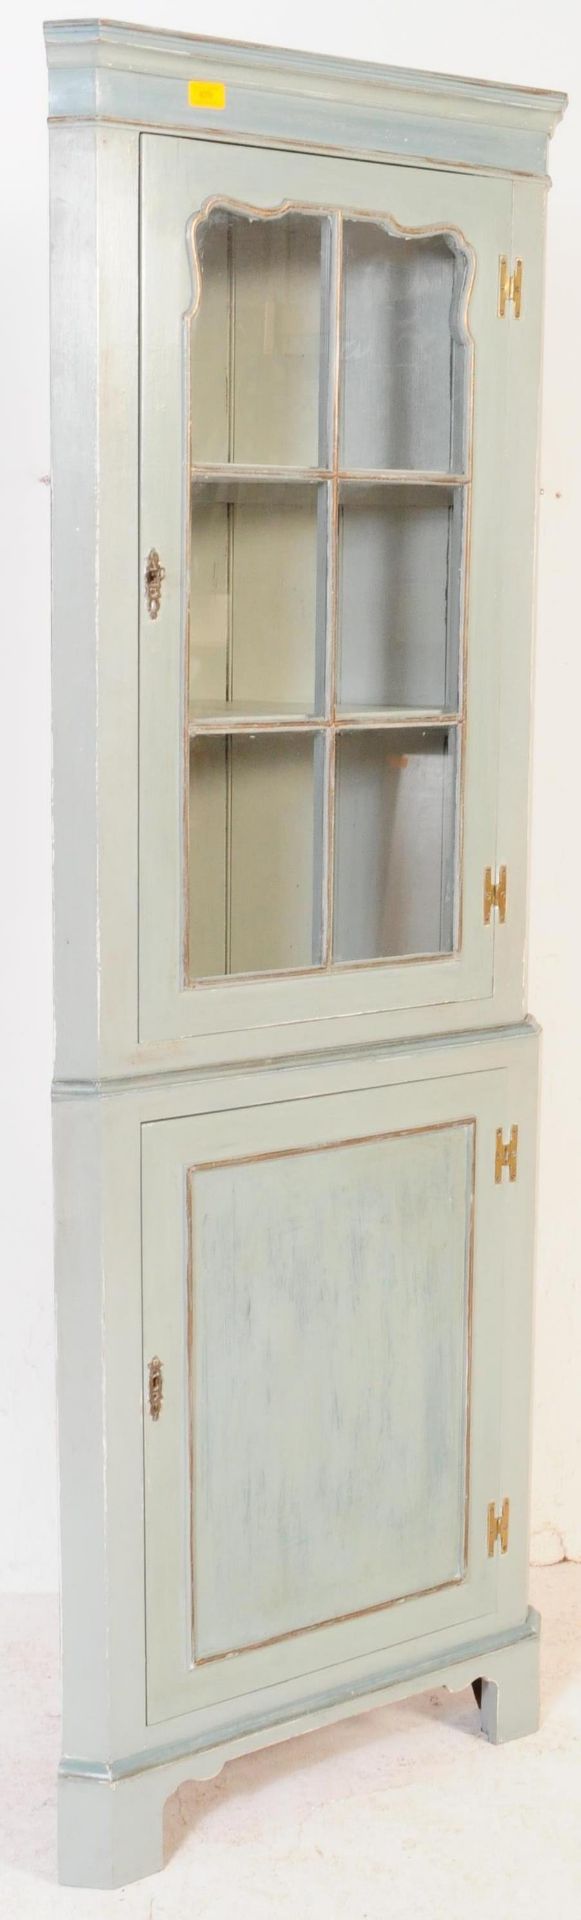 EARLY 20TH CENTURY PAINTED CORNER CABINET